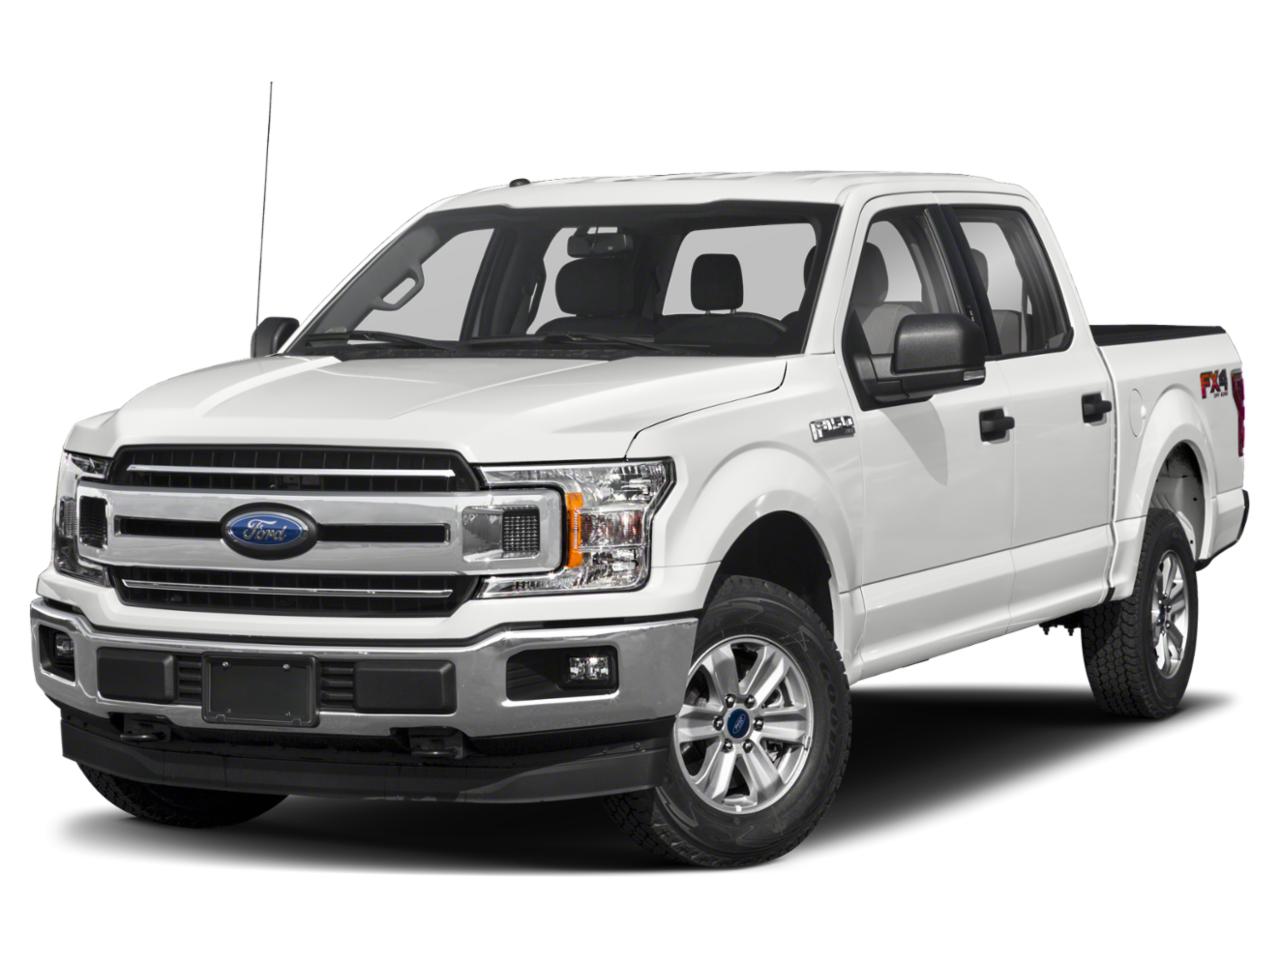 2020 Ford F-150 Vehicle Photo in Saint Charles, IL 60174